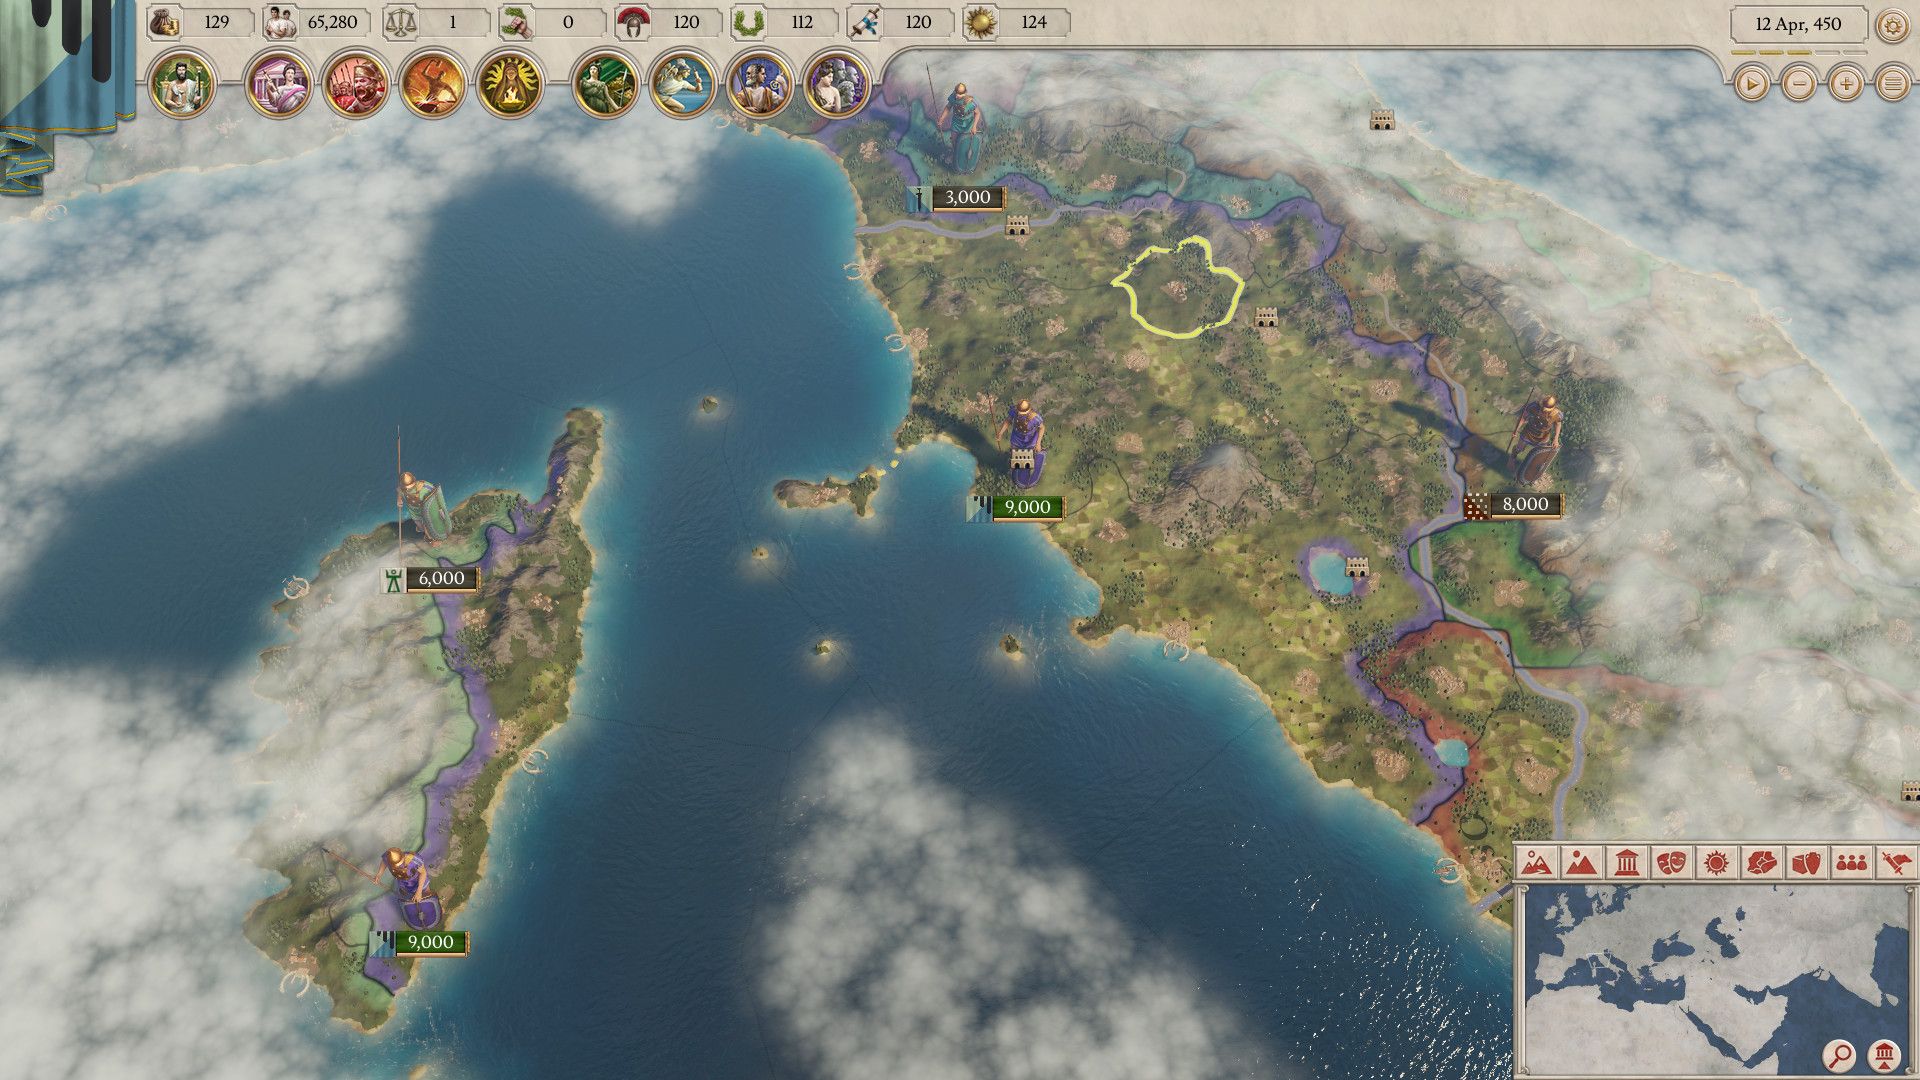 Paradox haven't decided if their new game Imperator: Rome will be on Linux (update: it will!)